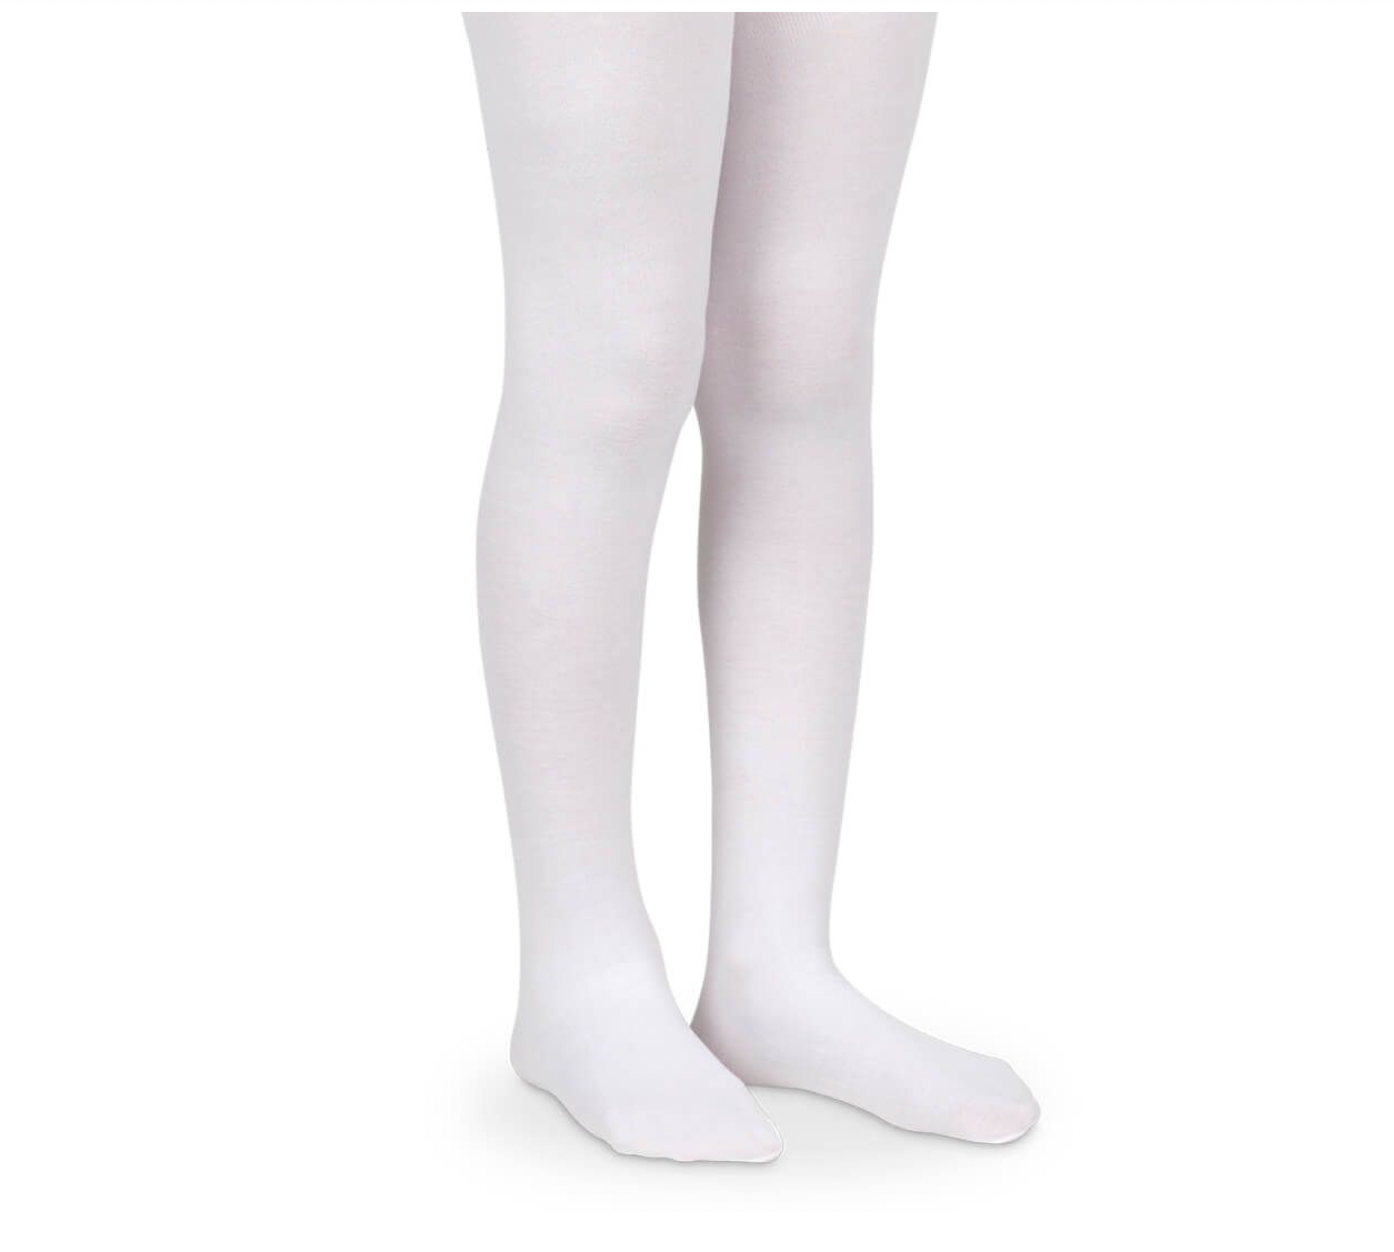 Jefferies Socks Girls Pima Cotton Solid Color Tights